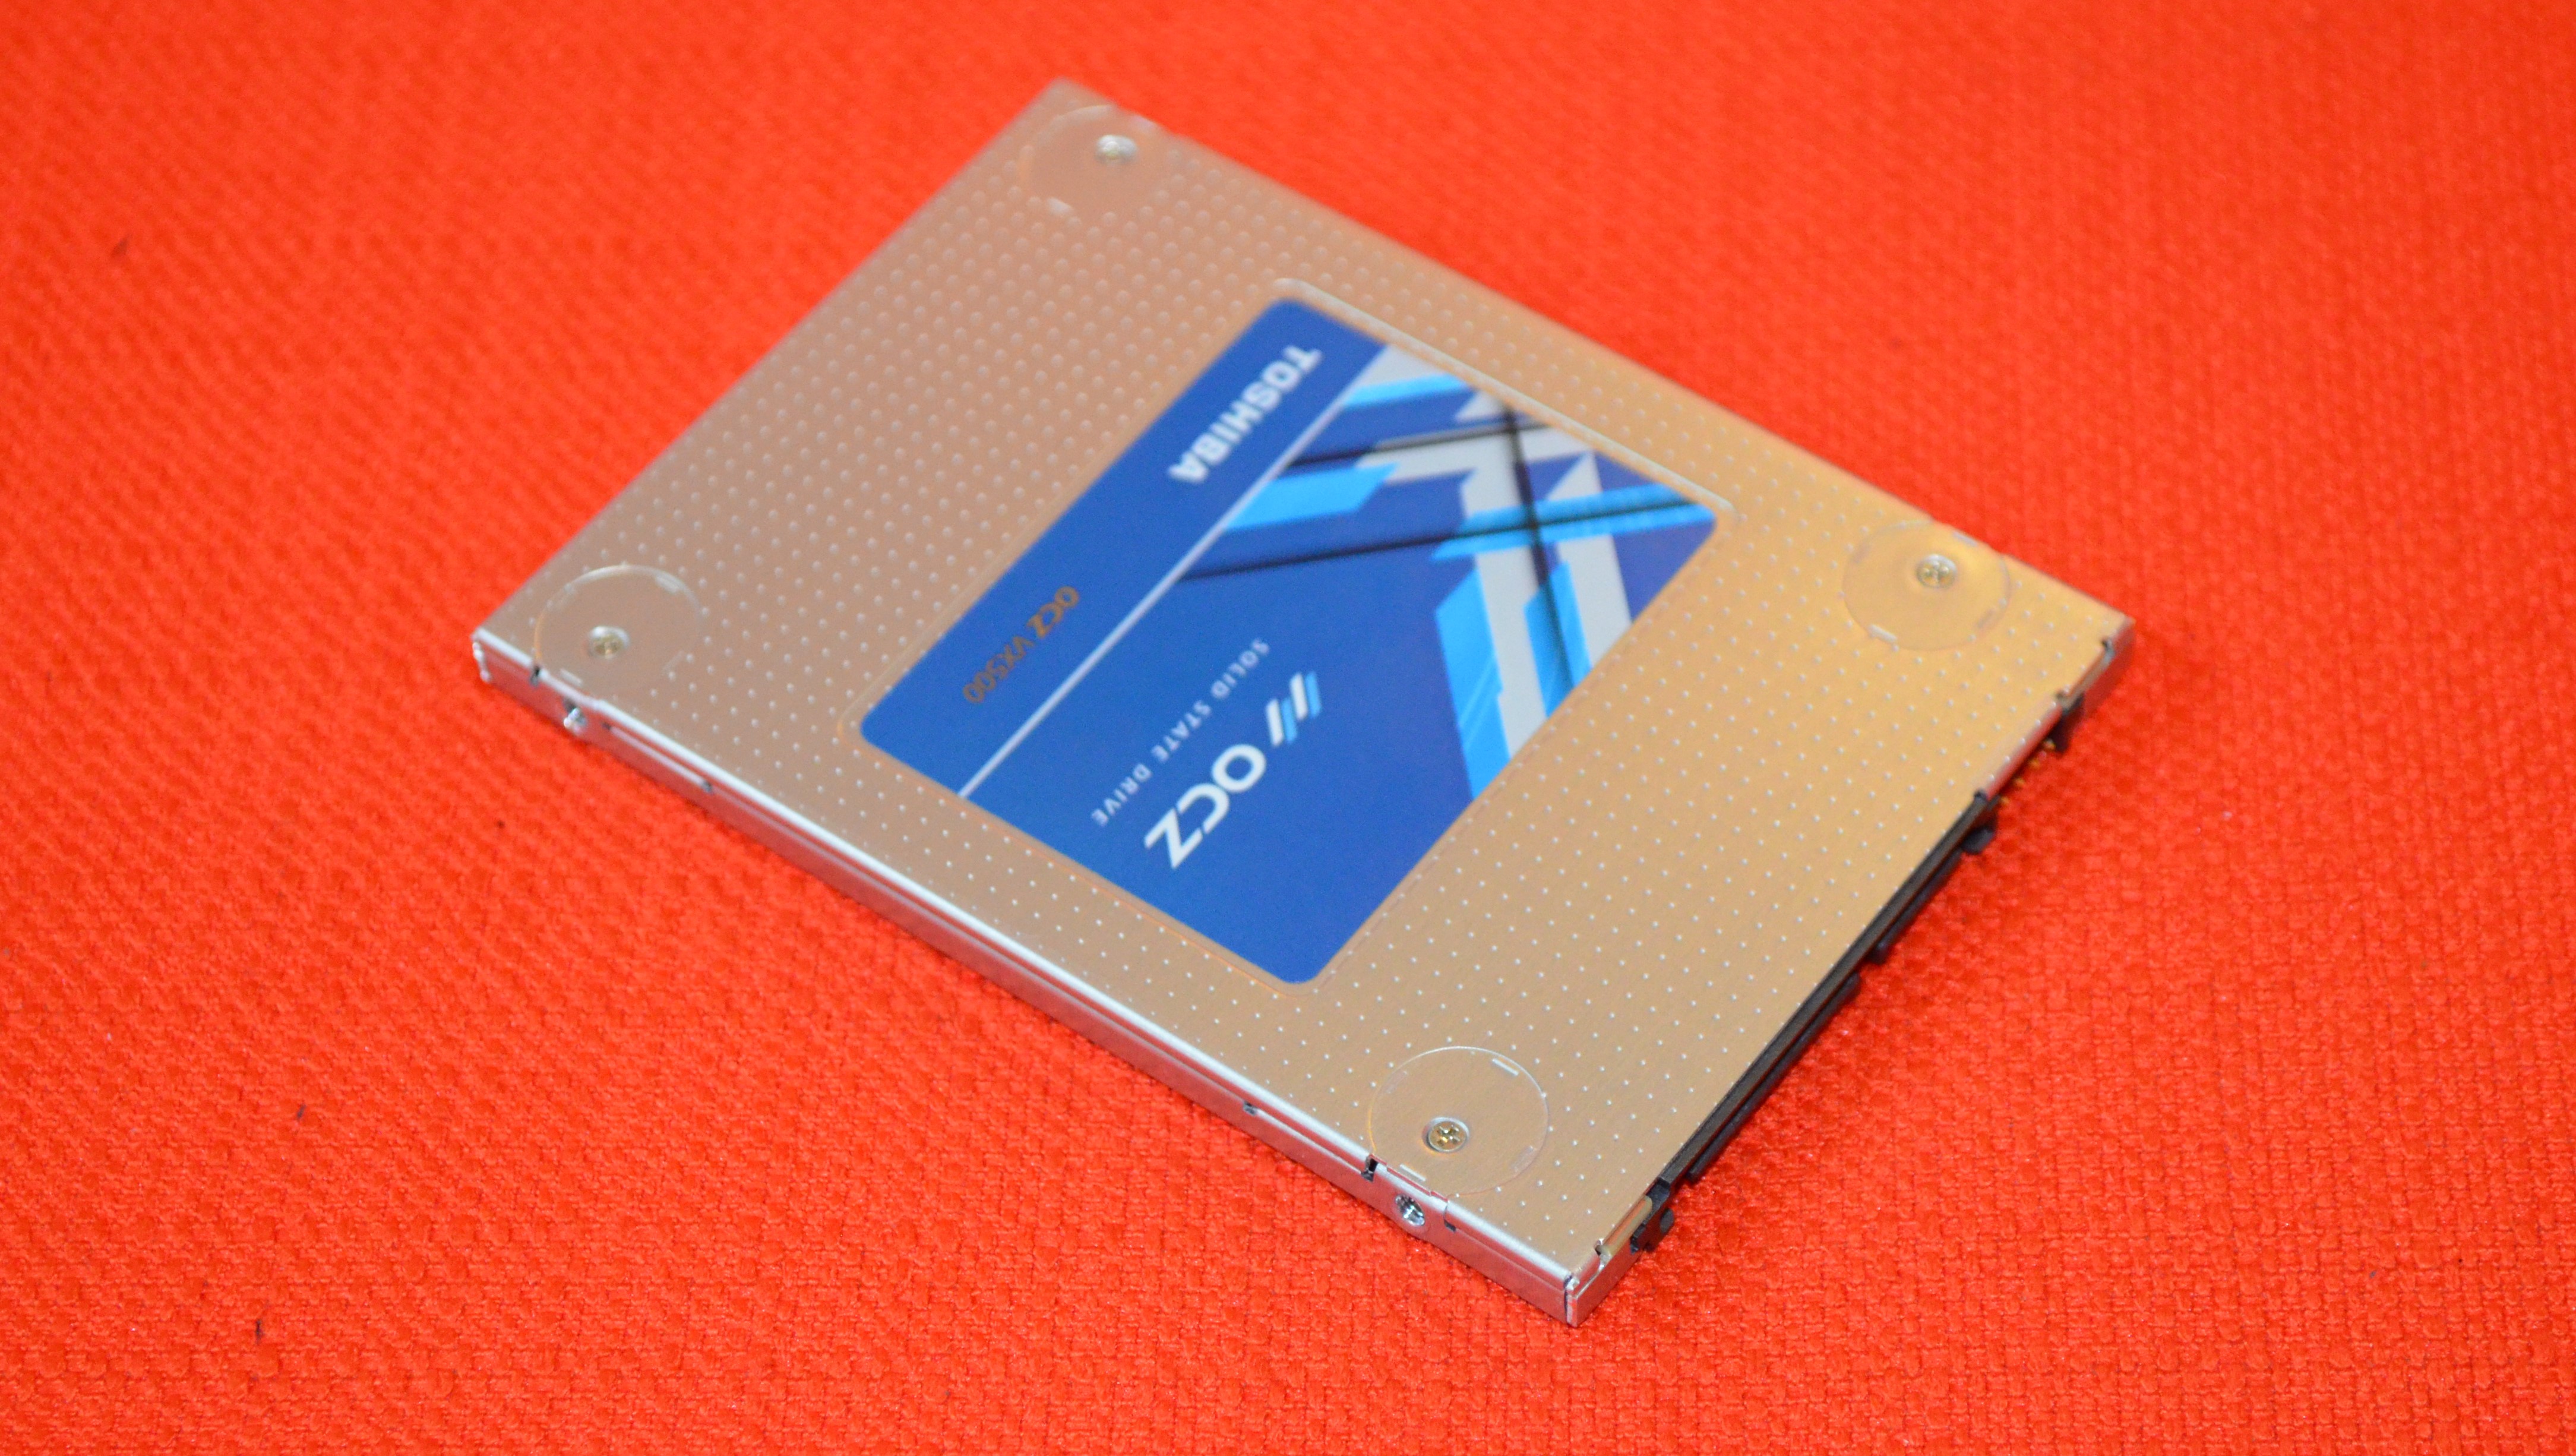 Toshiba OCZ VX500 SSD review: SSD with jaw-dropping speed comes at price - CNET